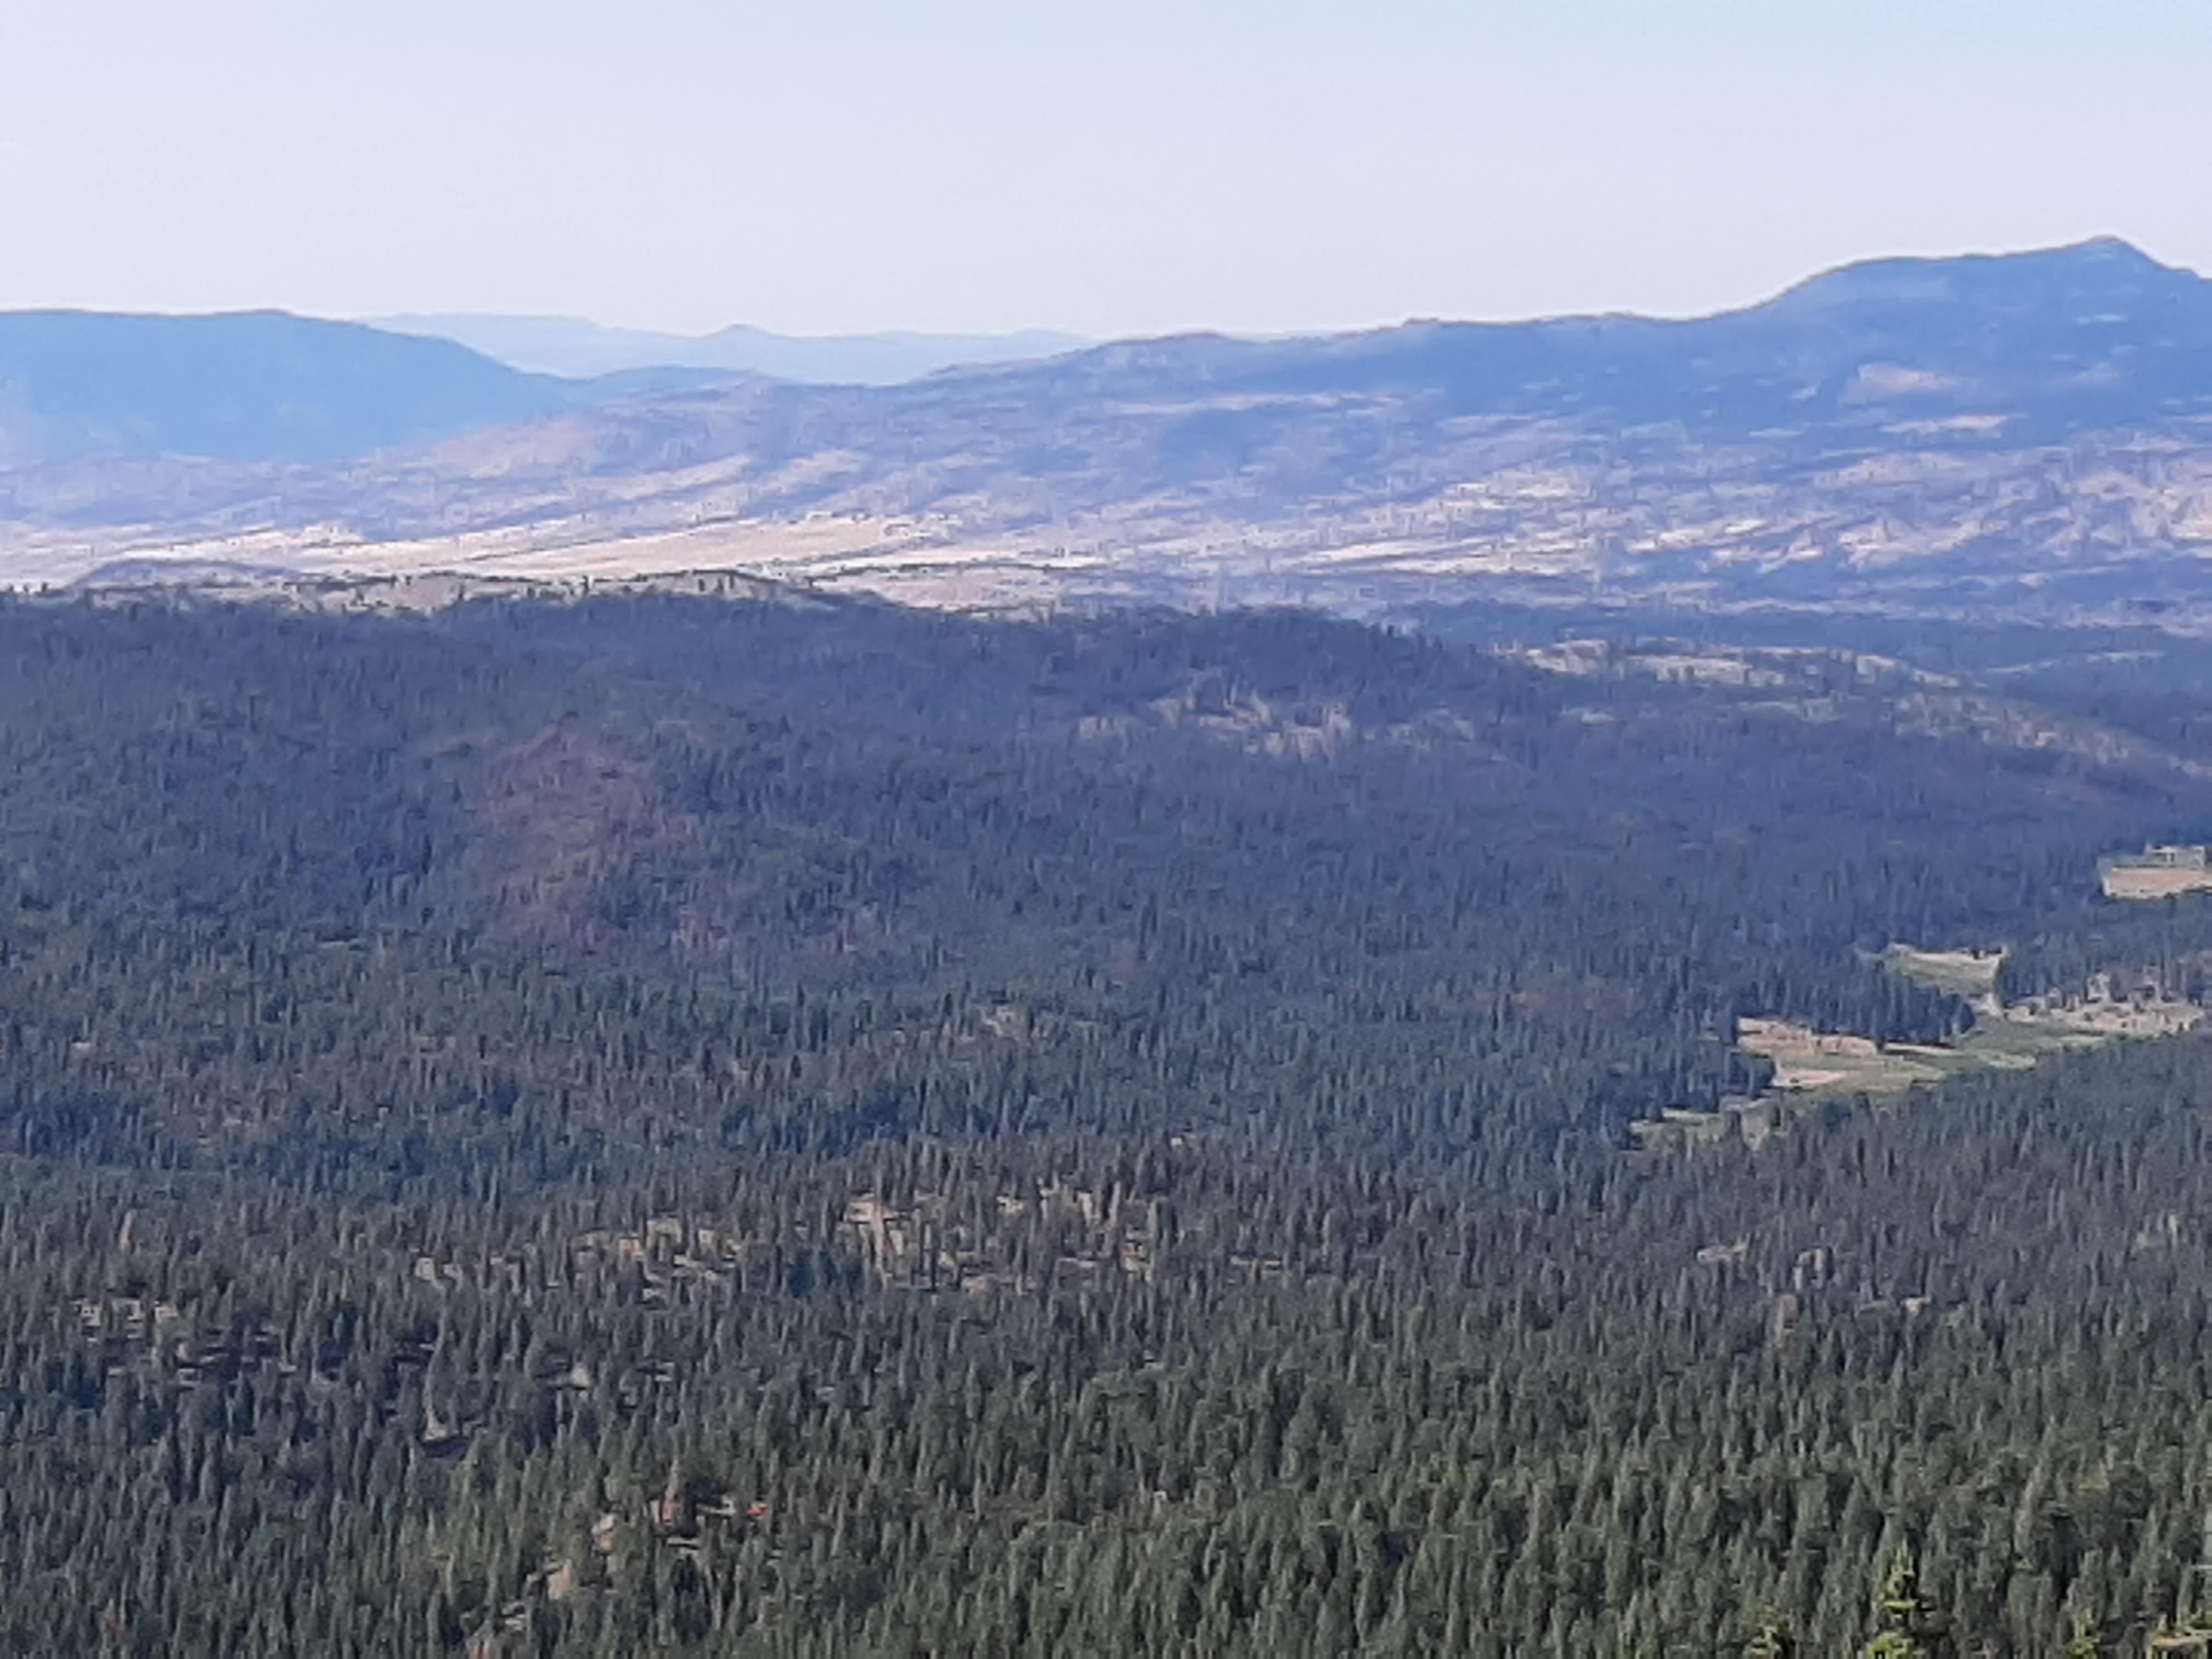 Image of the area of the Murderers Creek 6 prescribed fire area. 